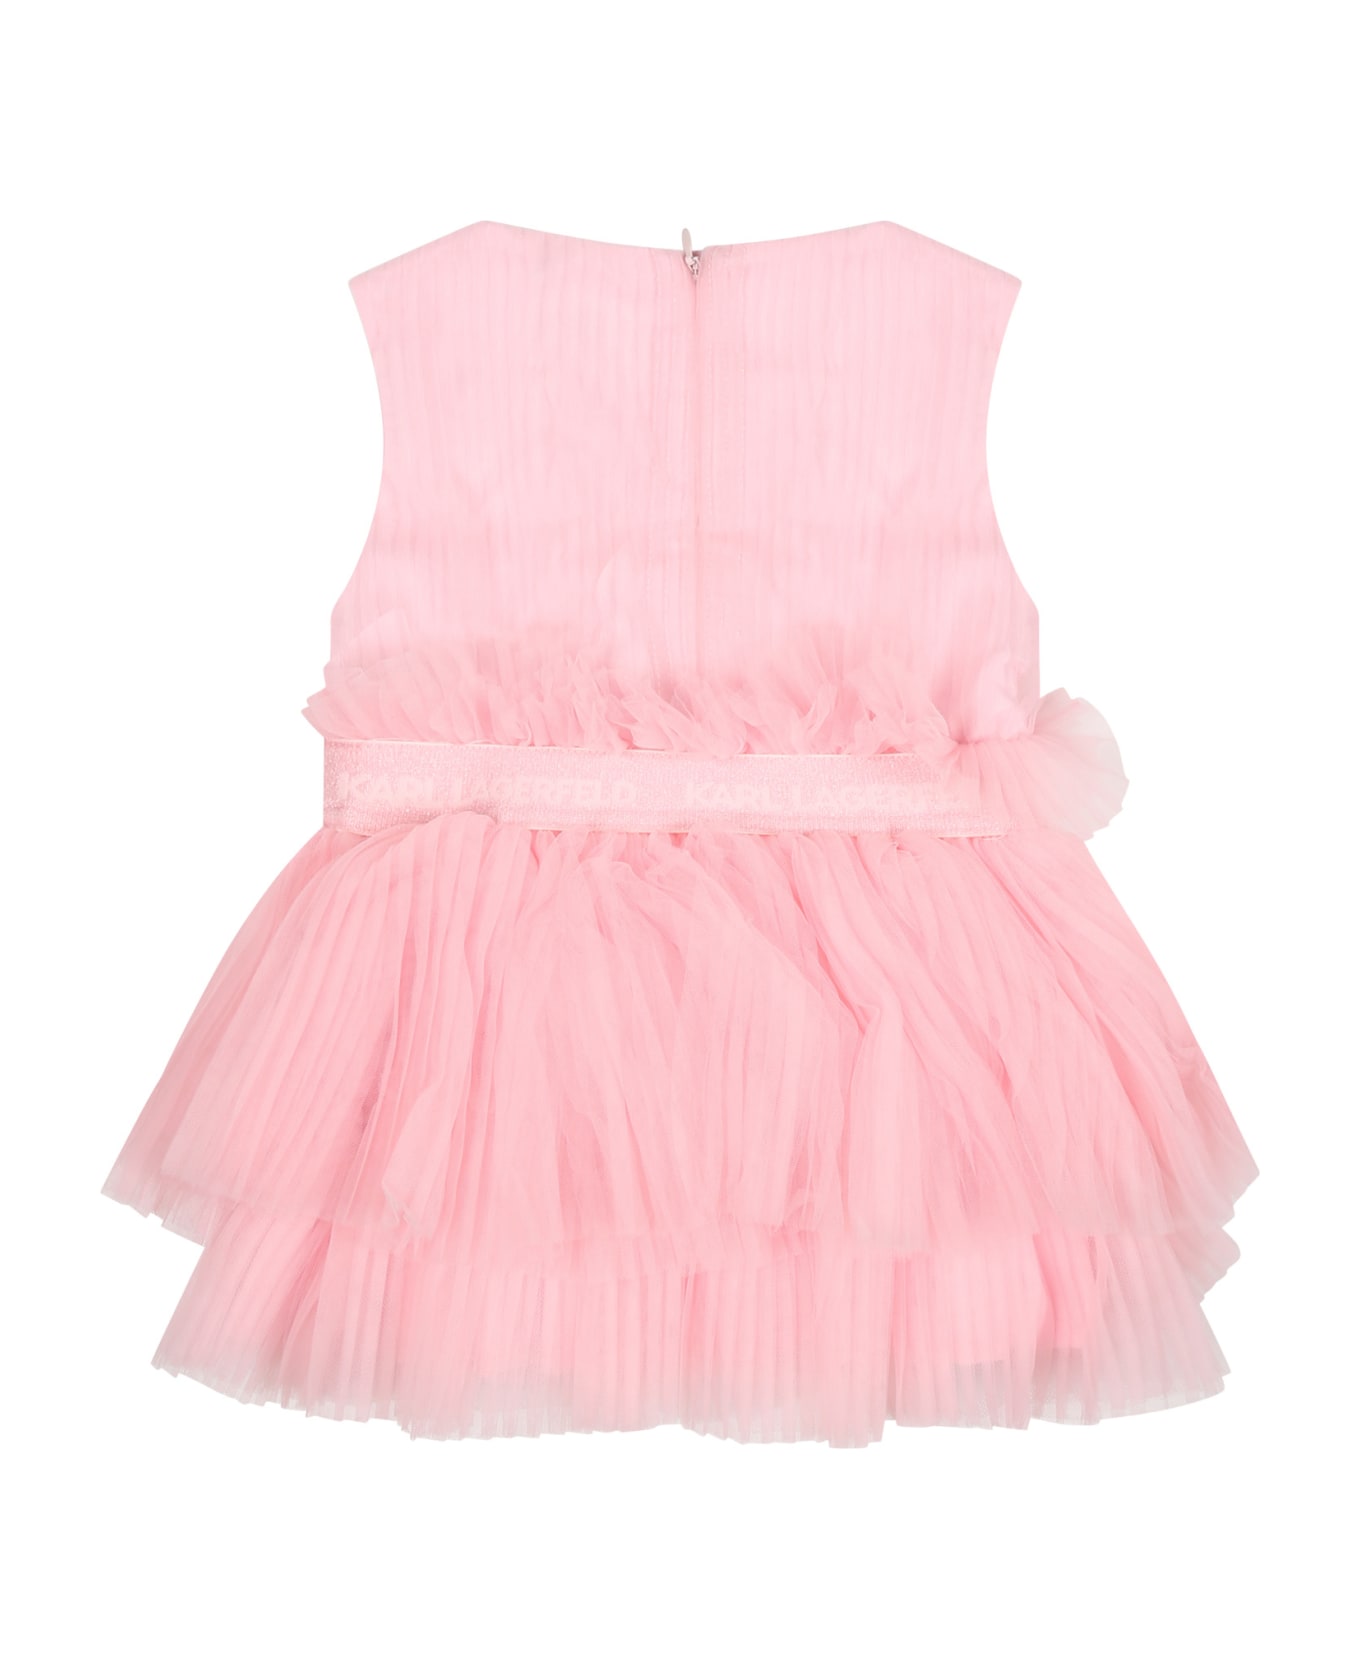 Karl Lagerfeld Kids Pink Dress For Baby Girl With Logo - Pink